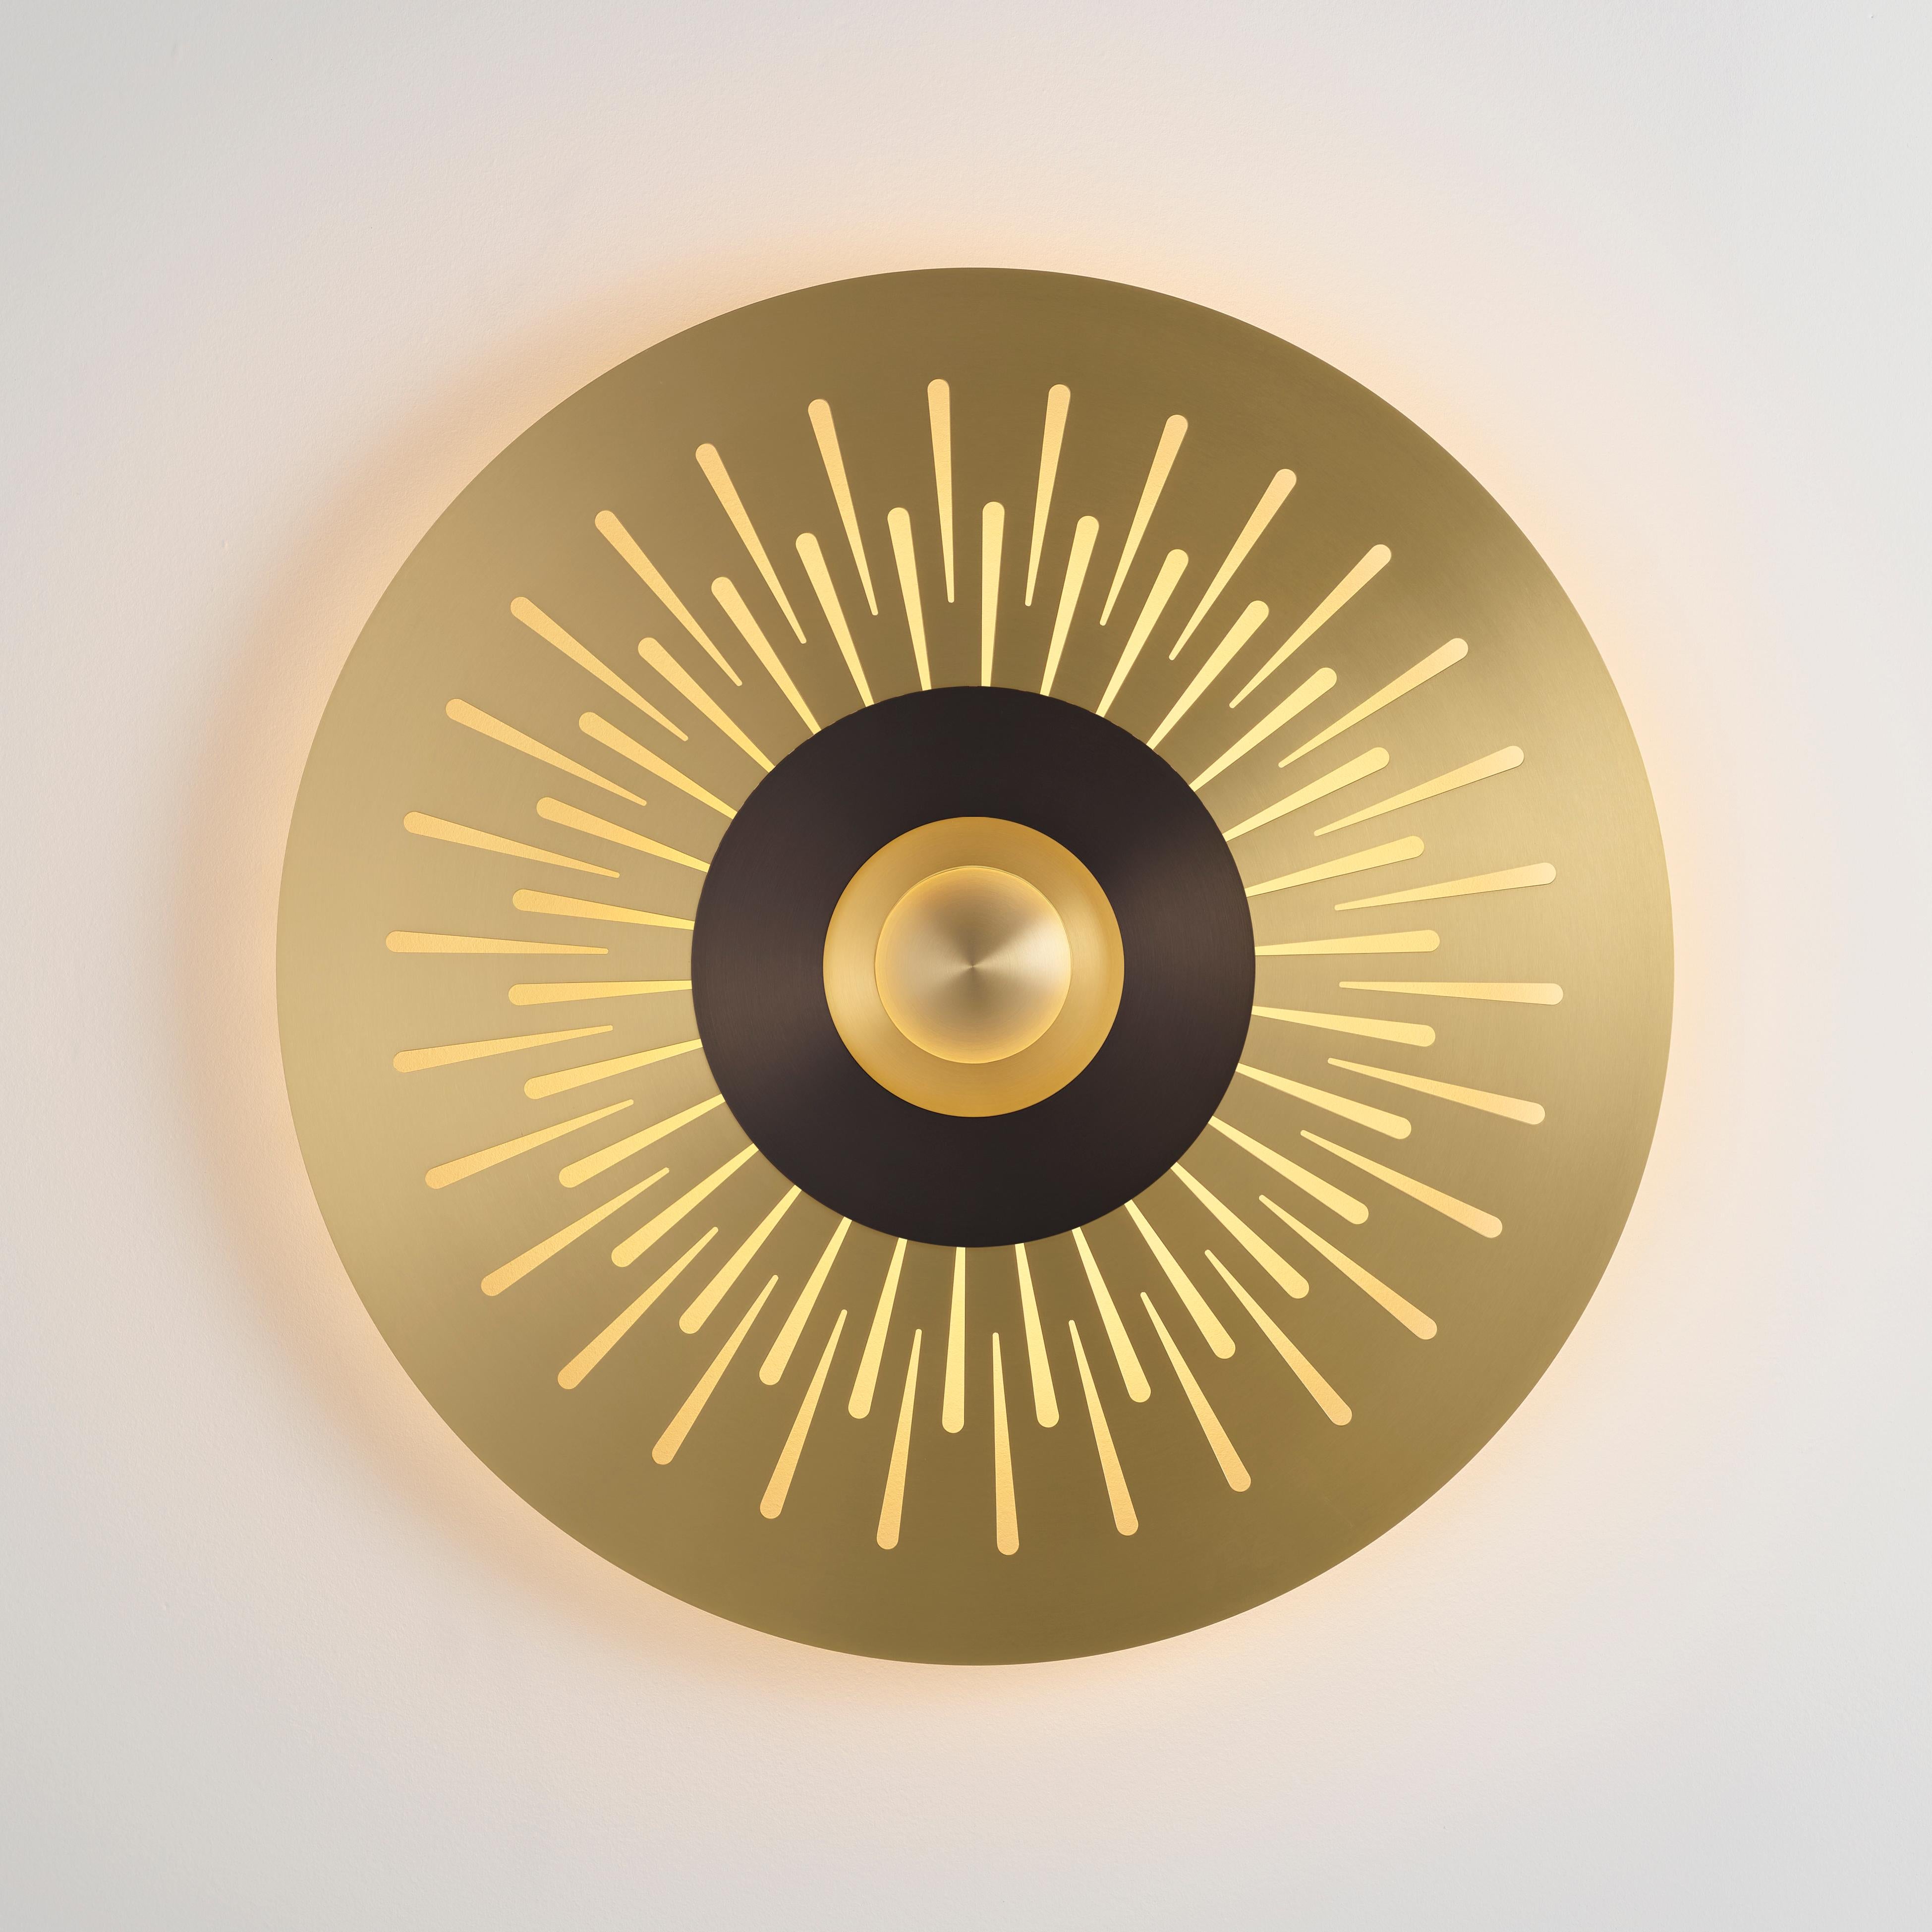 Atmos Stella wall light by Emilie Cathelineau
Dimensions: D 80 cm
Materials: Solid brass, Polycarbonate diffuser.
Others finishes and dimensions are available.

All our lamps can be wired according to each country. If sold to the USA it will be